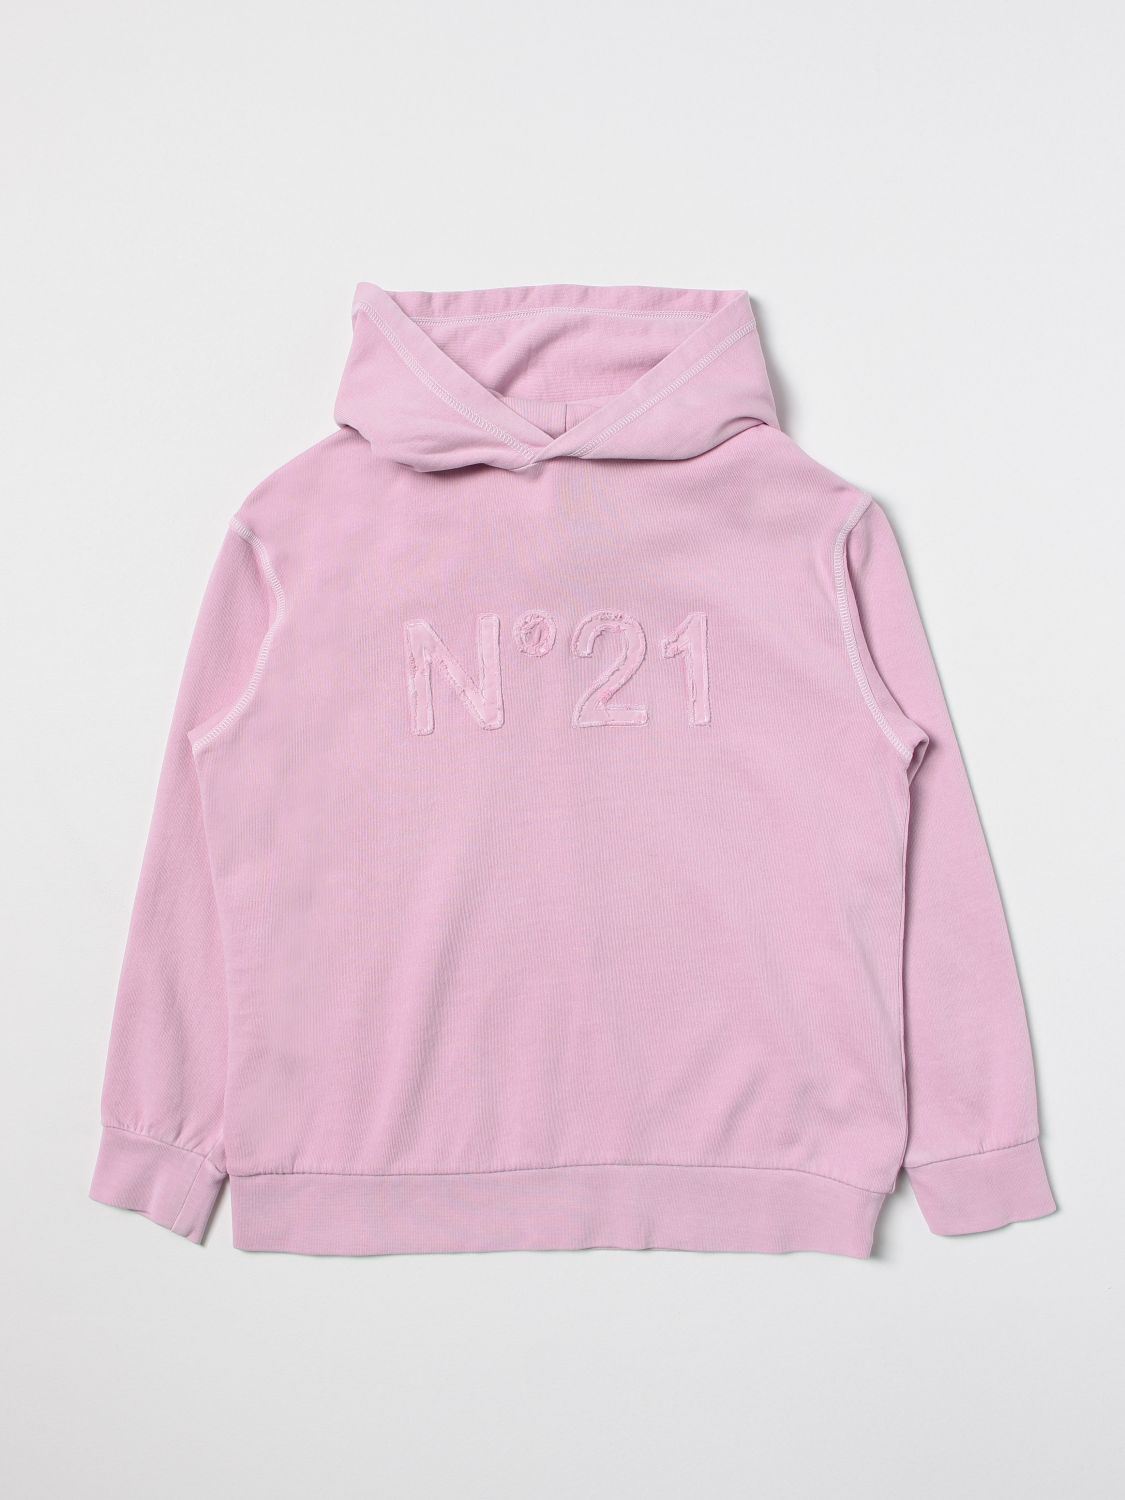 N°21 SWEATER N° 21 KIDS COLOR LILAC,E04405038